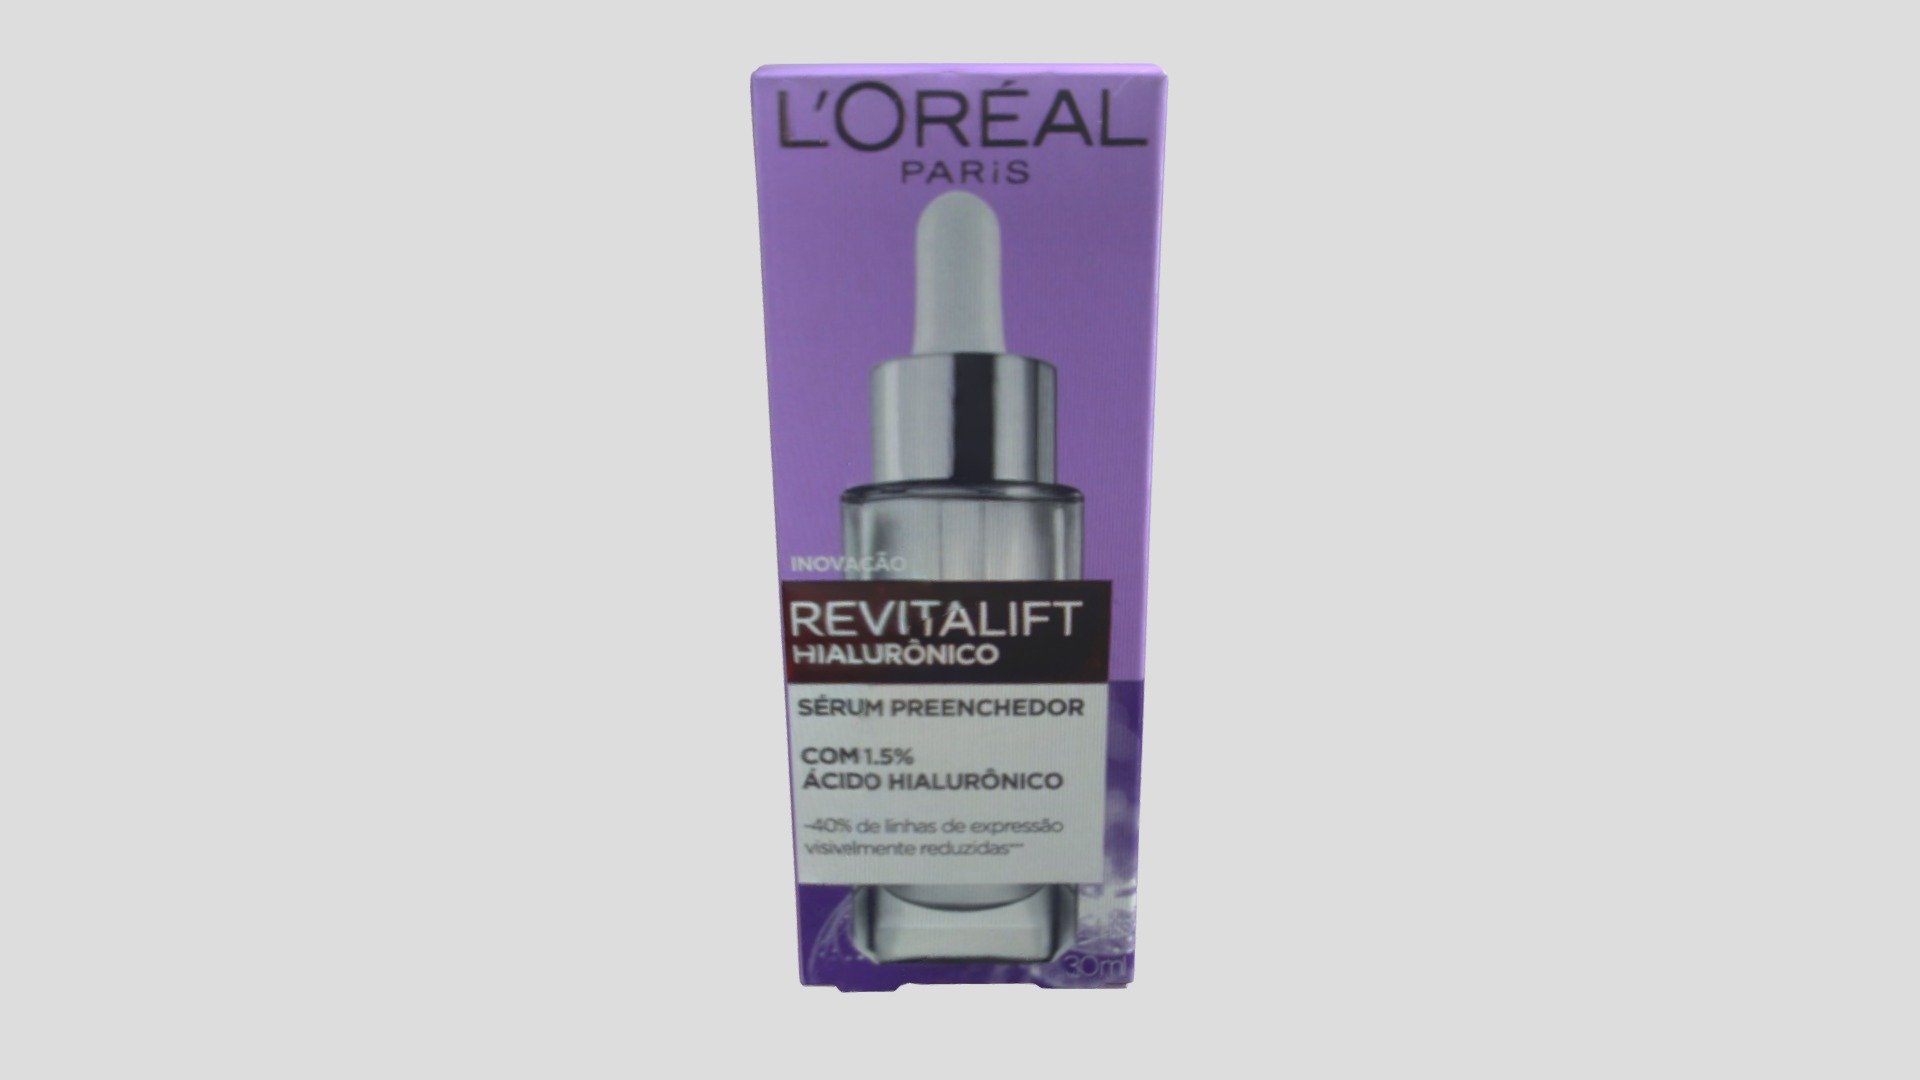 LOREAL - (A) Revitalift hialuronico - 3D model by 42LabsCS 3d model